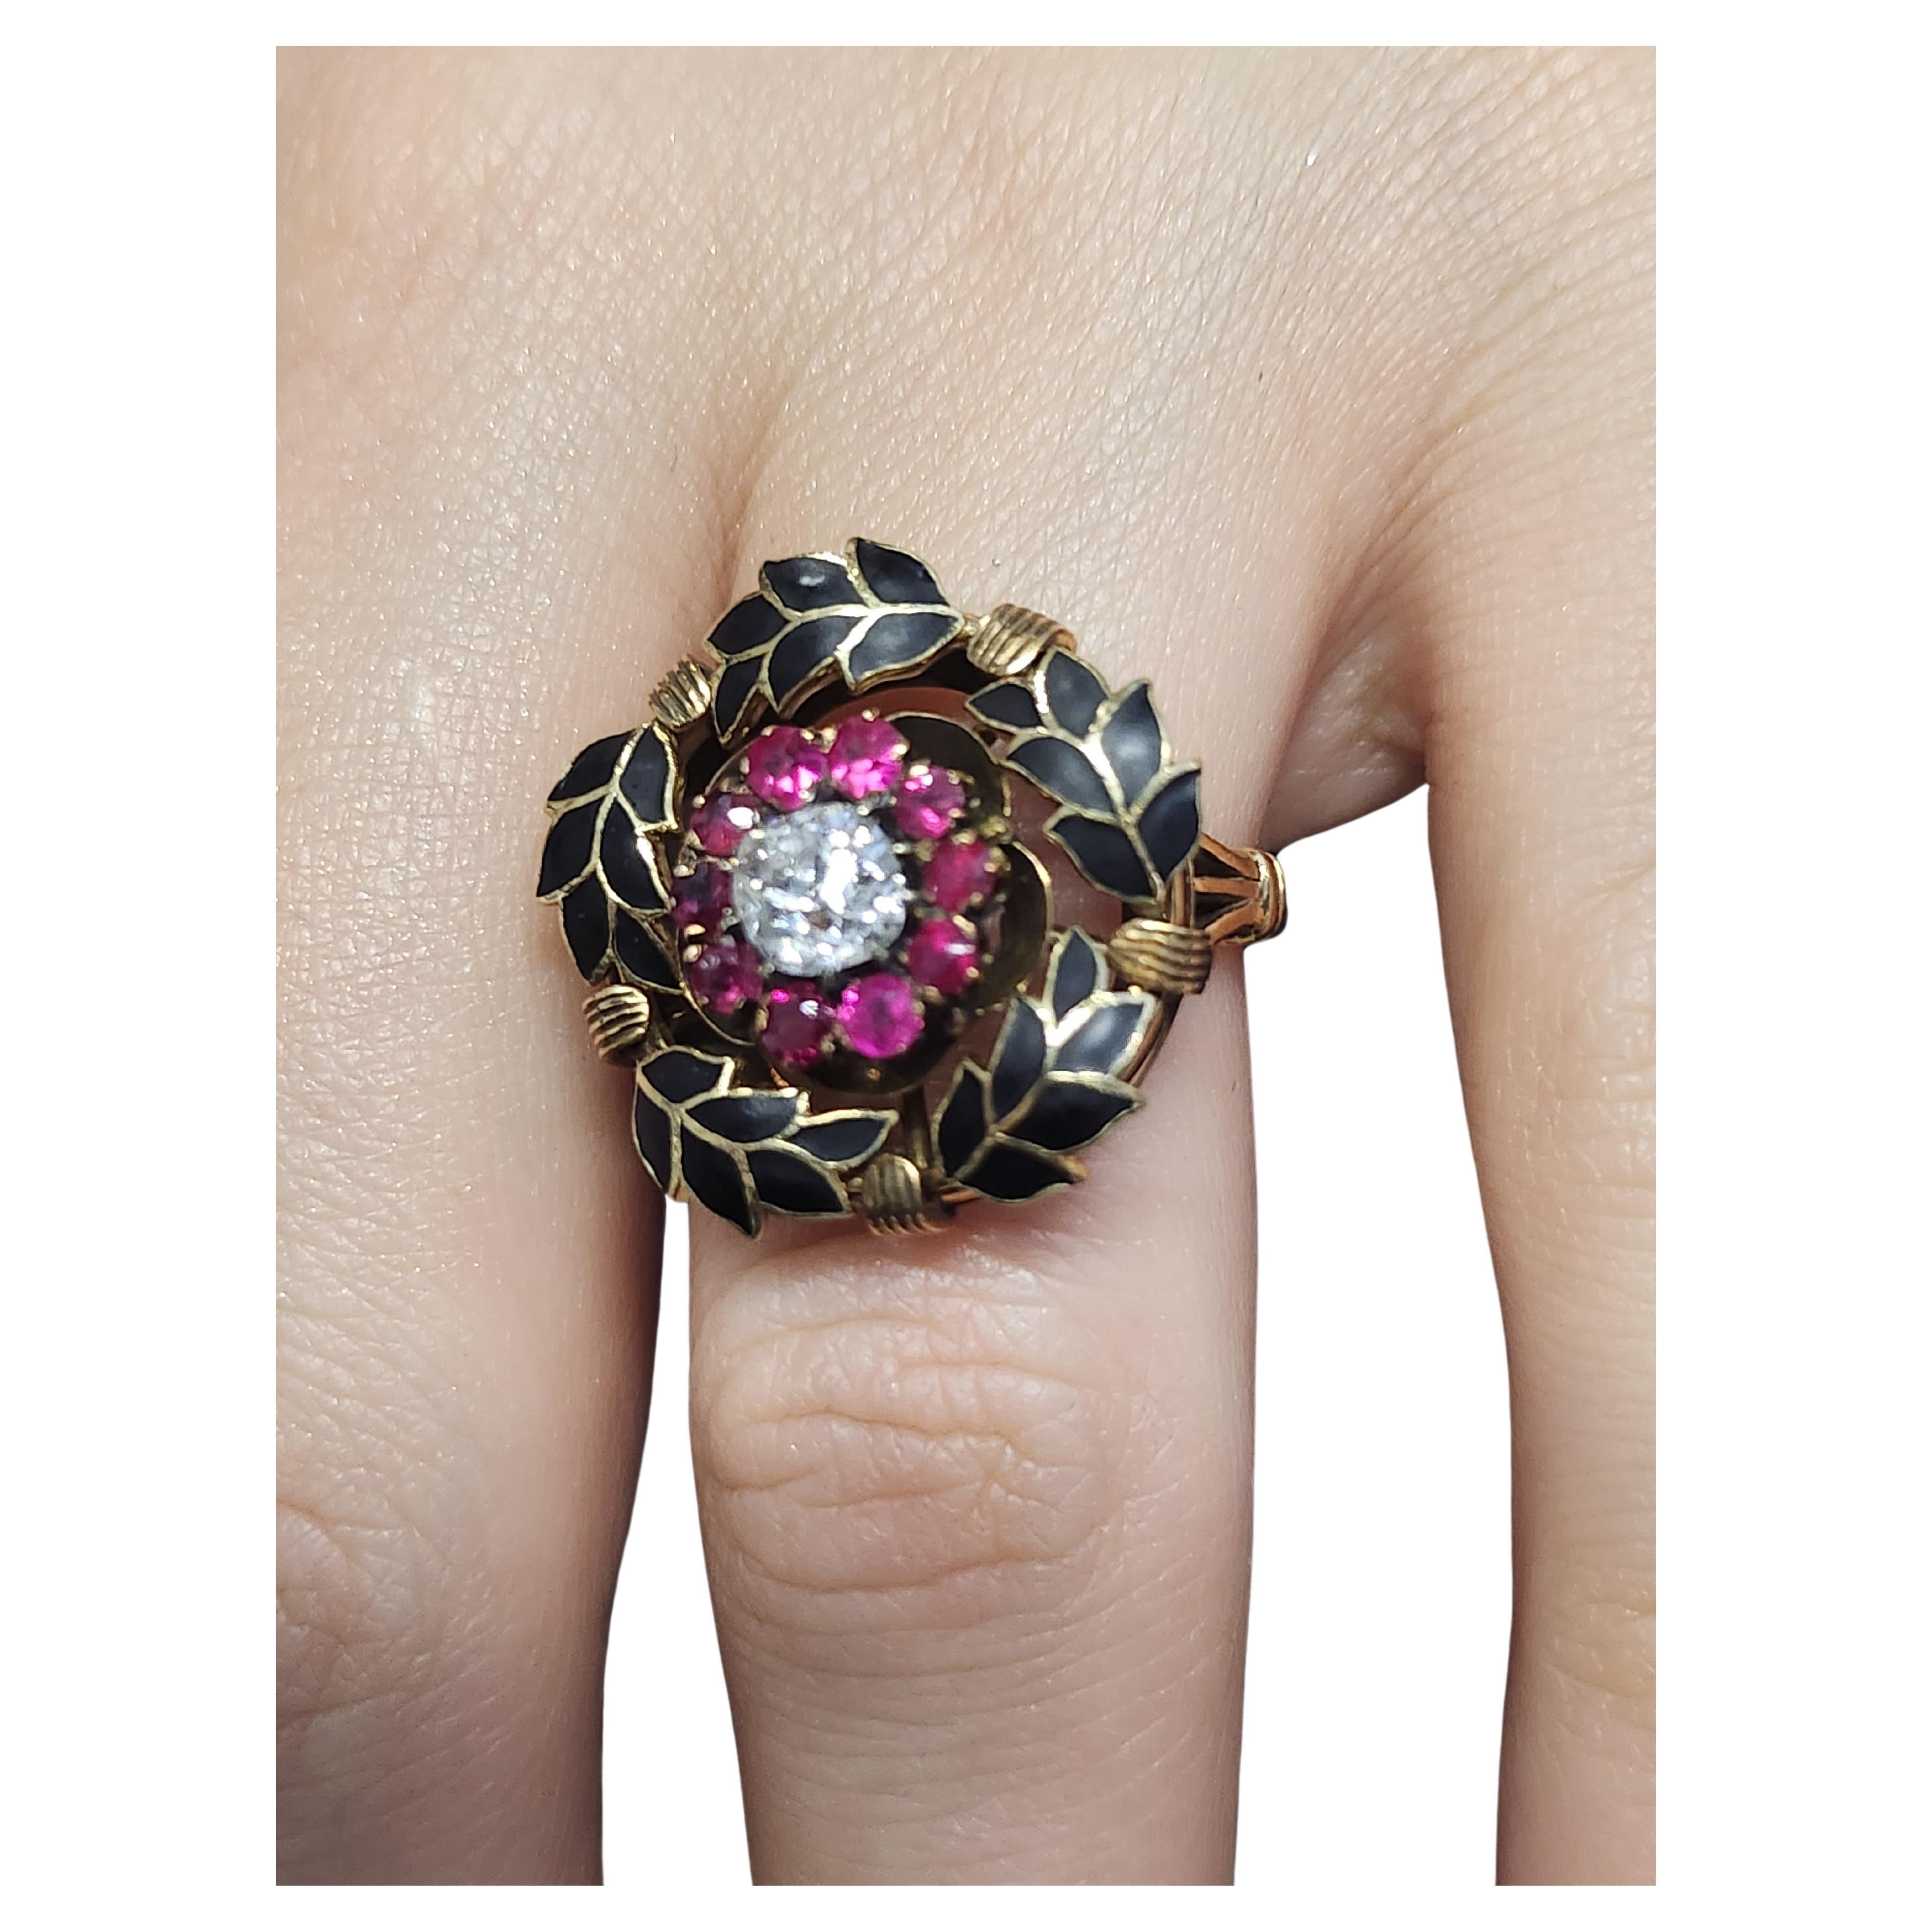 14k gold large heavy ring in black enamel olive branch ring head designe centered with old mine cut diamond estimate weight 0.50 carats H color white flanked with red ruby stones 